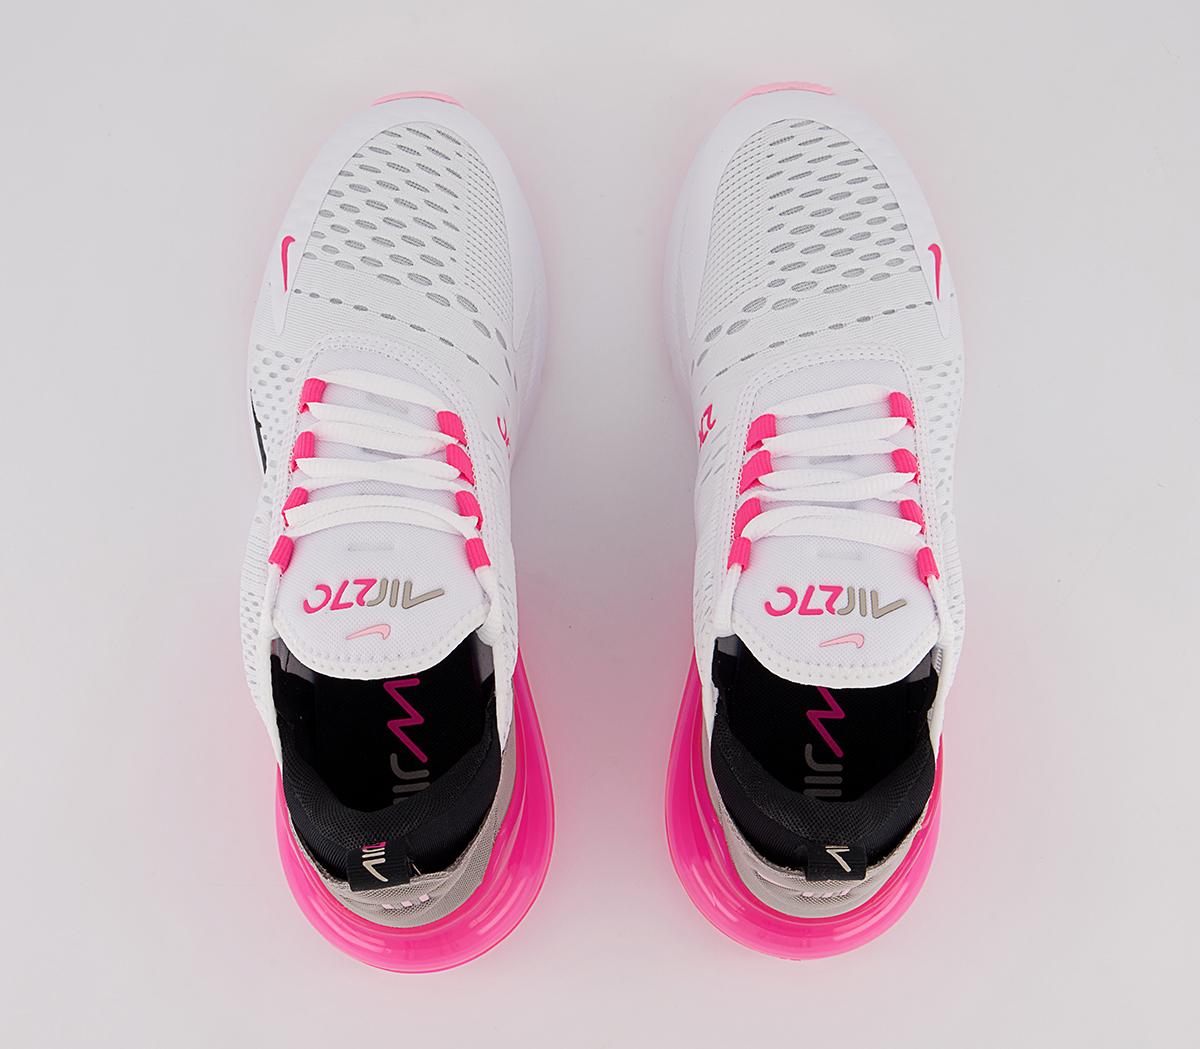 Nike Air Max 270 Trainers White Artic Punch Hyper Pink Womens Trainers